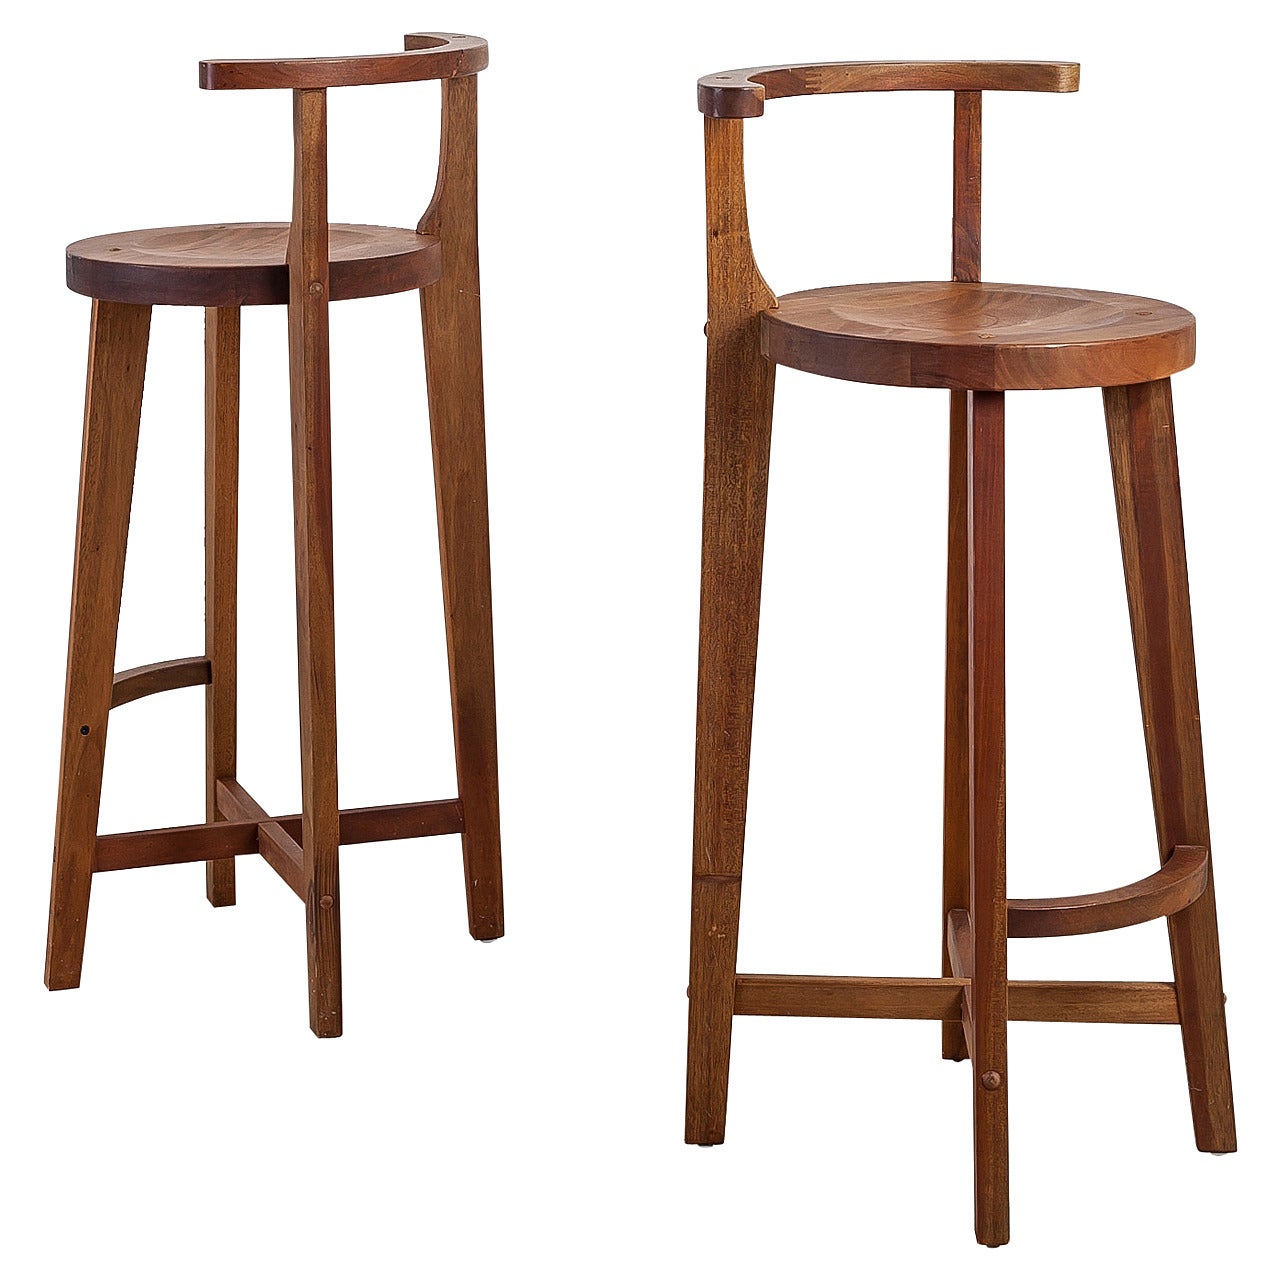 Pair Studio crafted wooden bar stools with rounded back rests For Sale